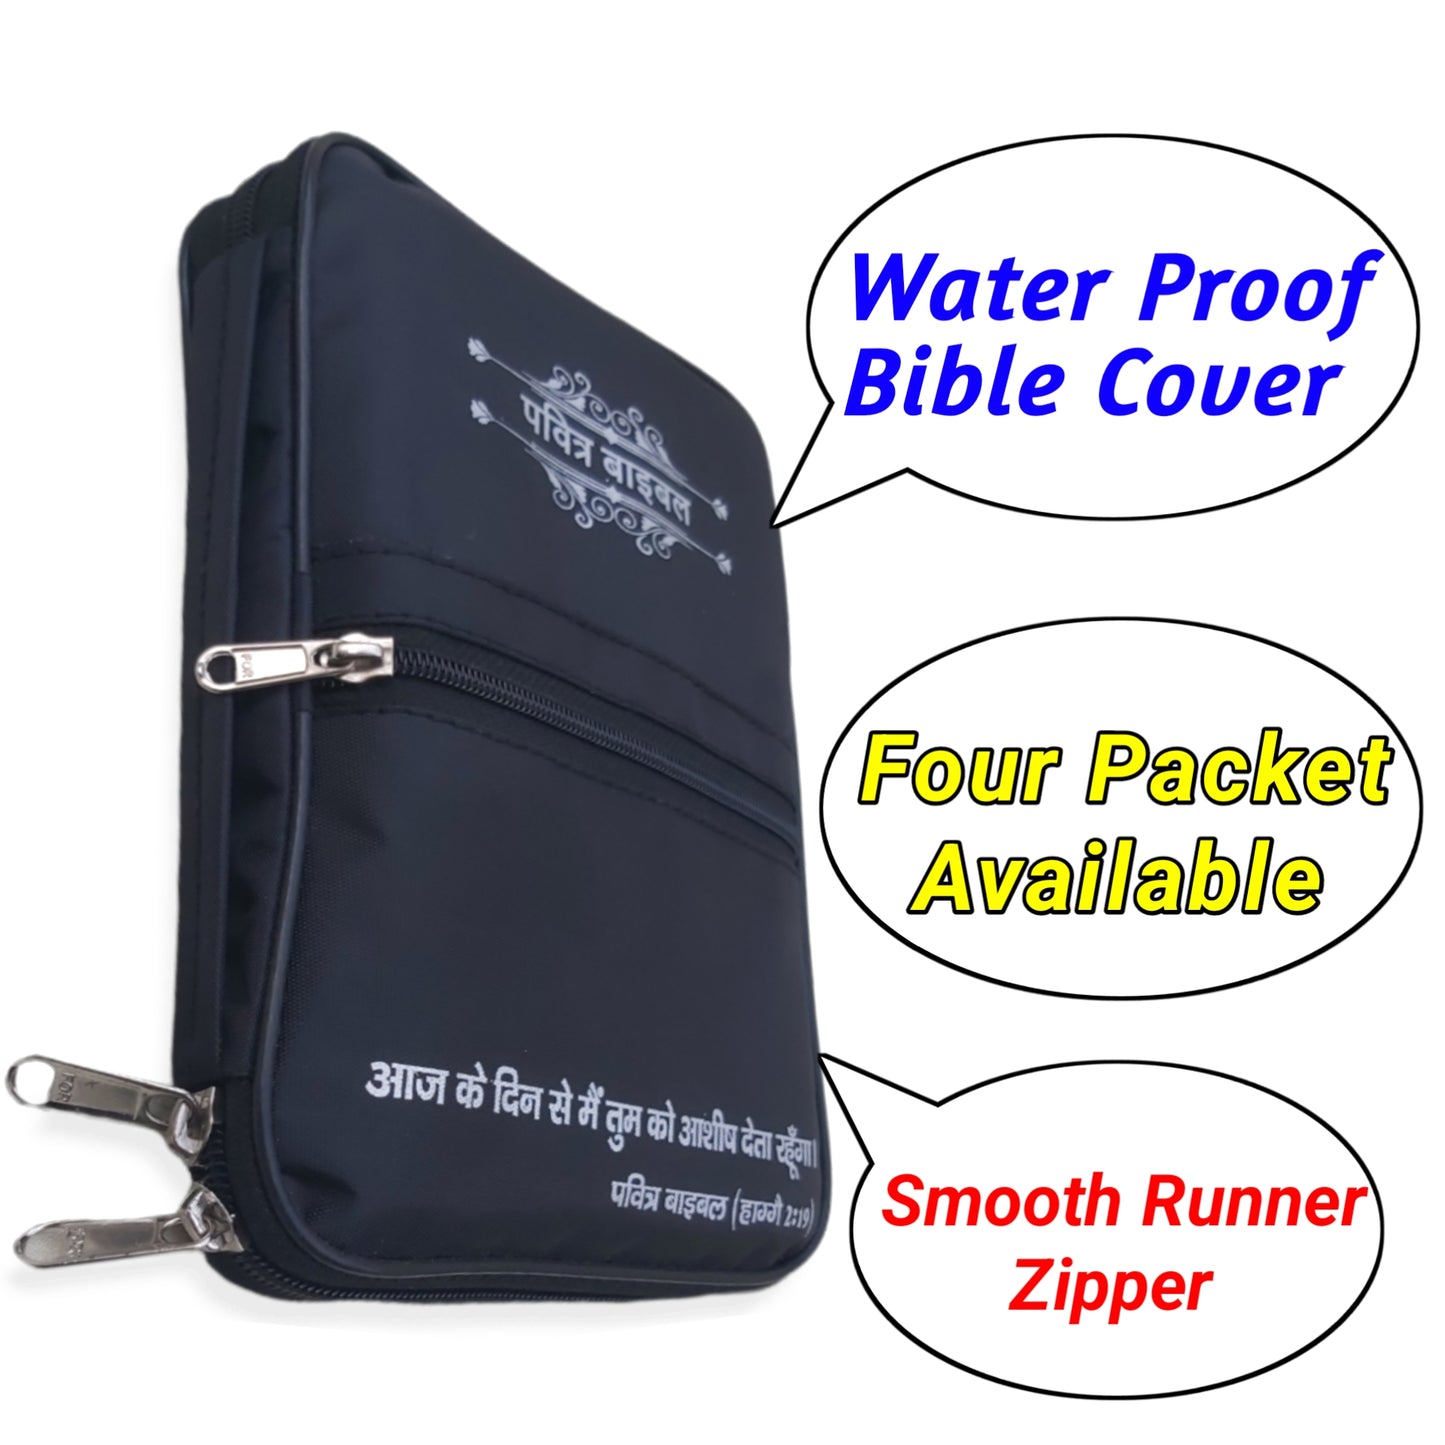 Water Proof Cover With Golden Key Chaine